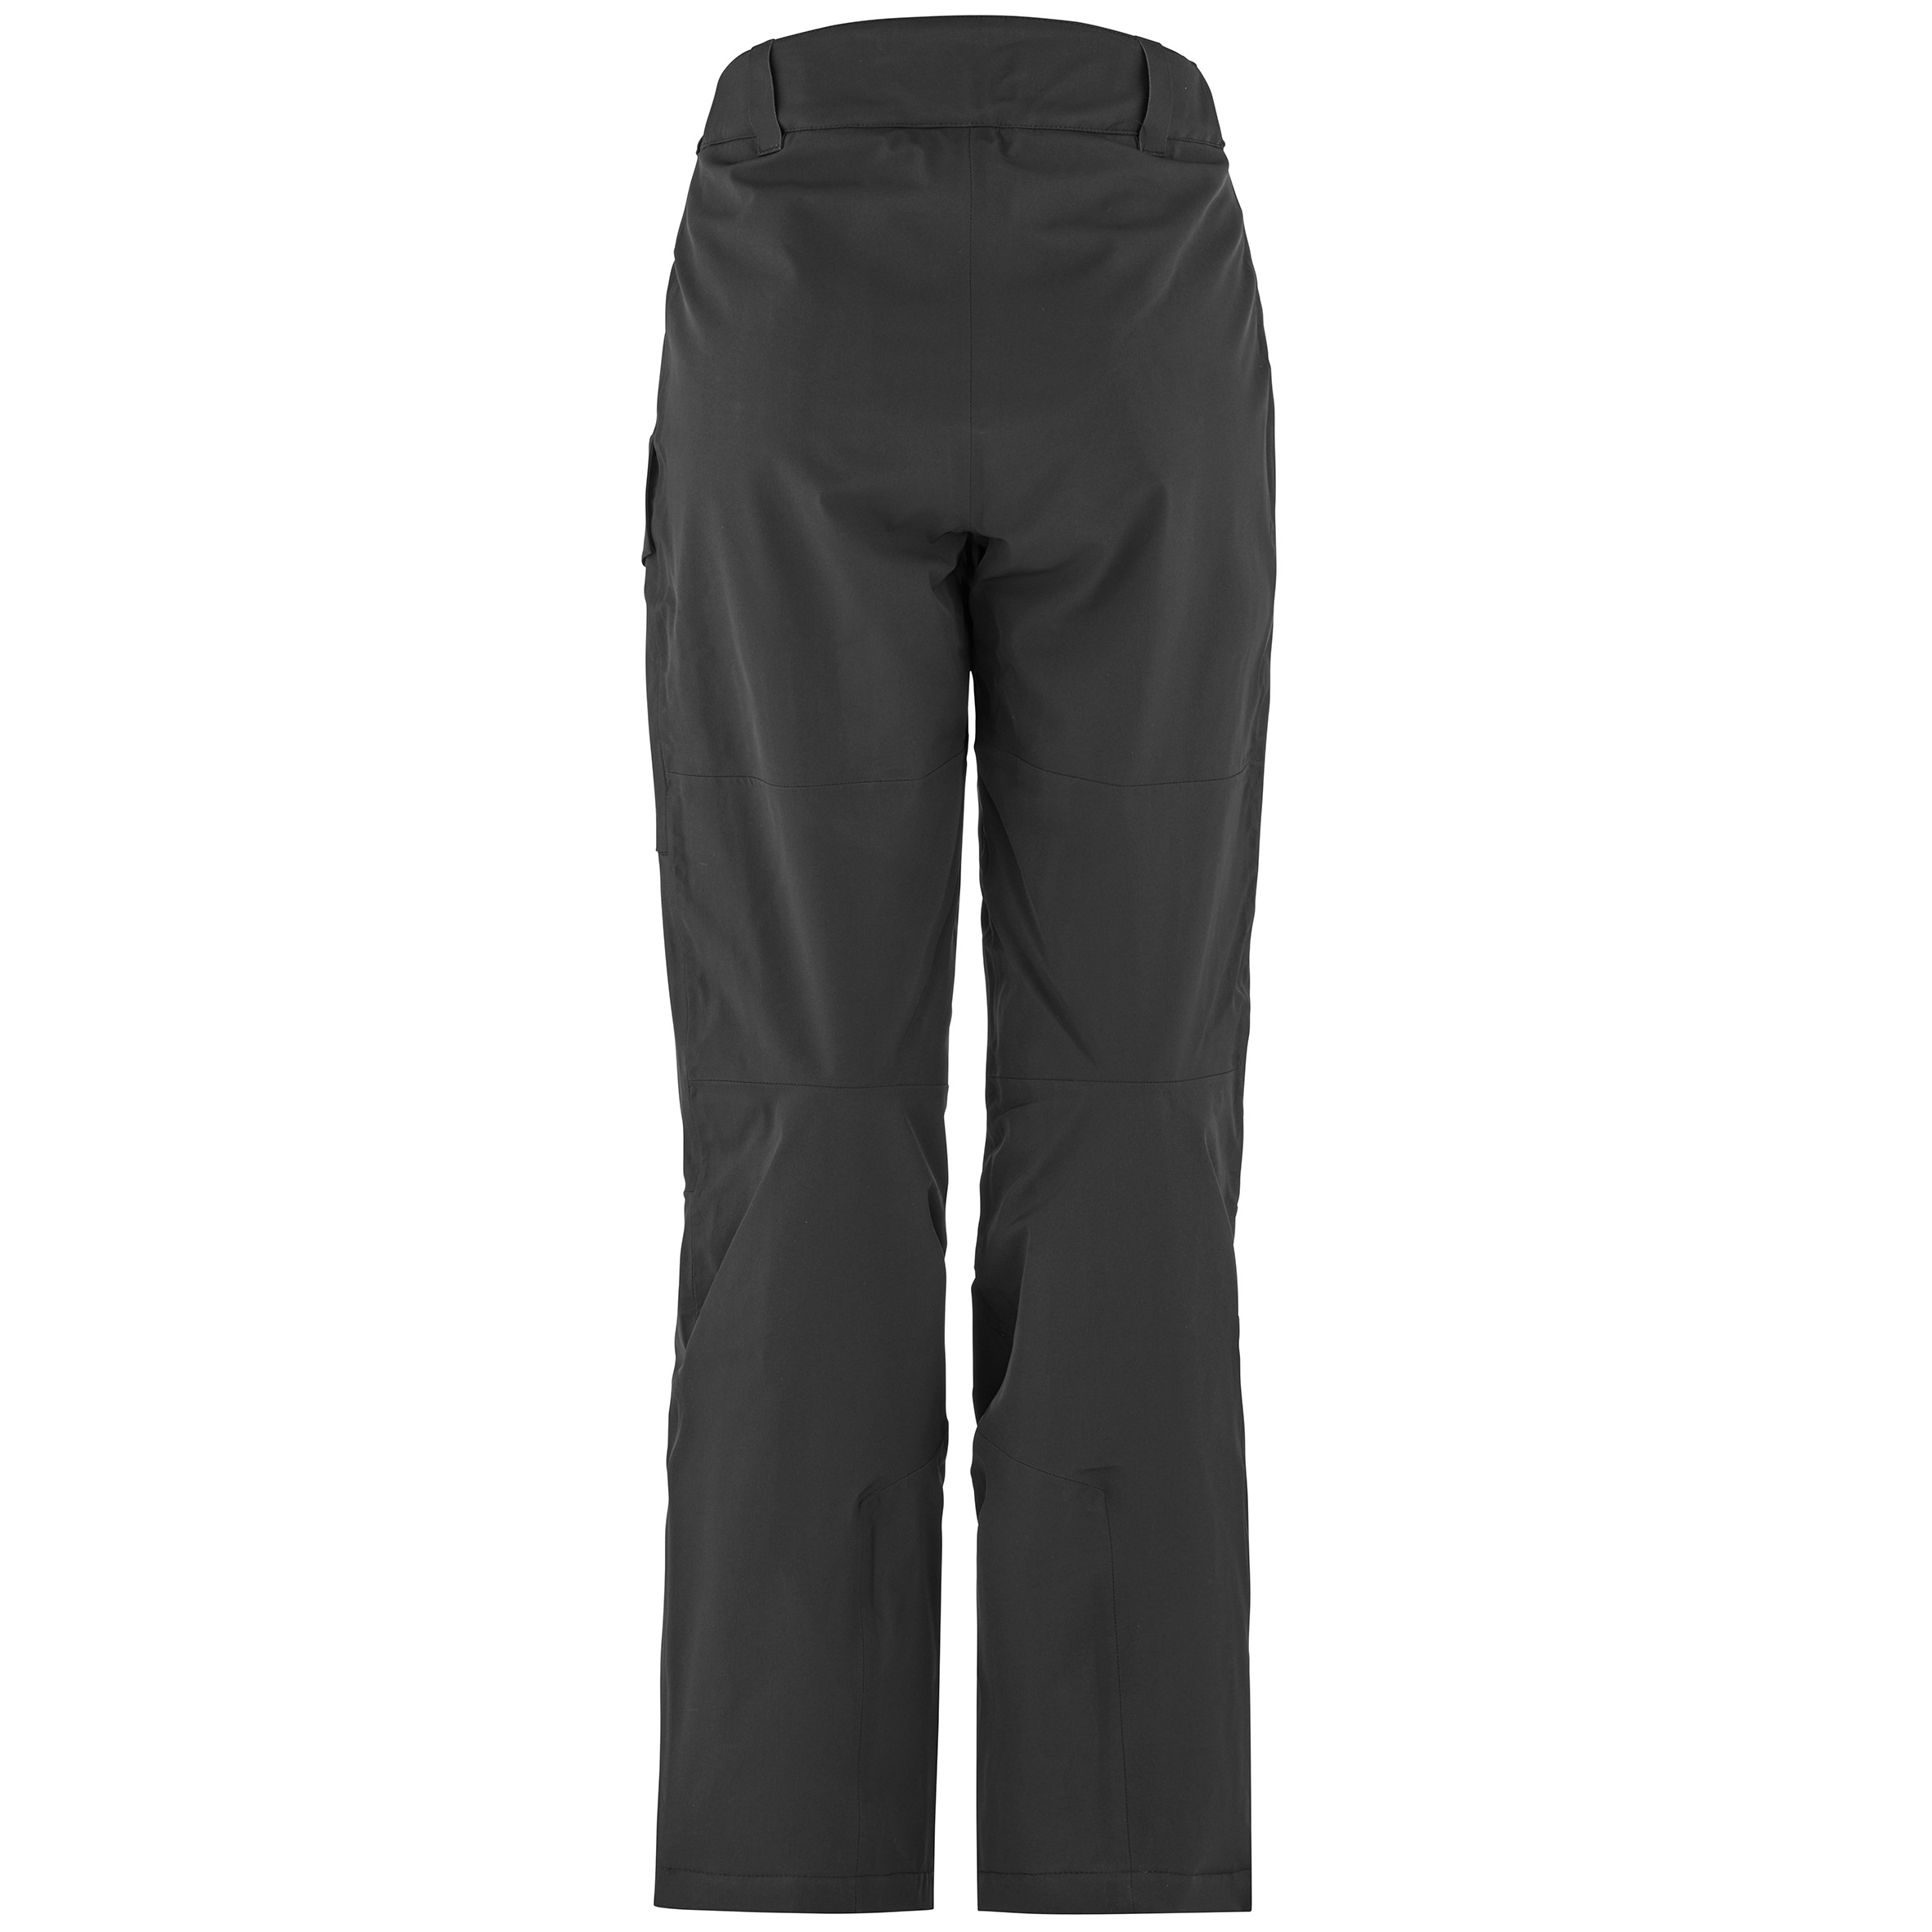 Buy Women's Agnes Ski Pant DOVE here | Outnorth